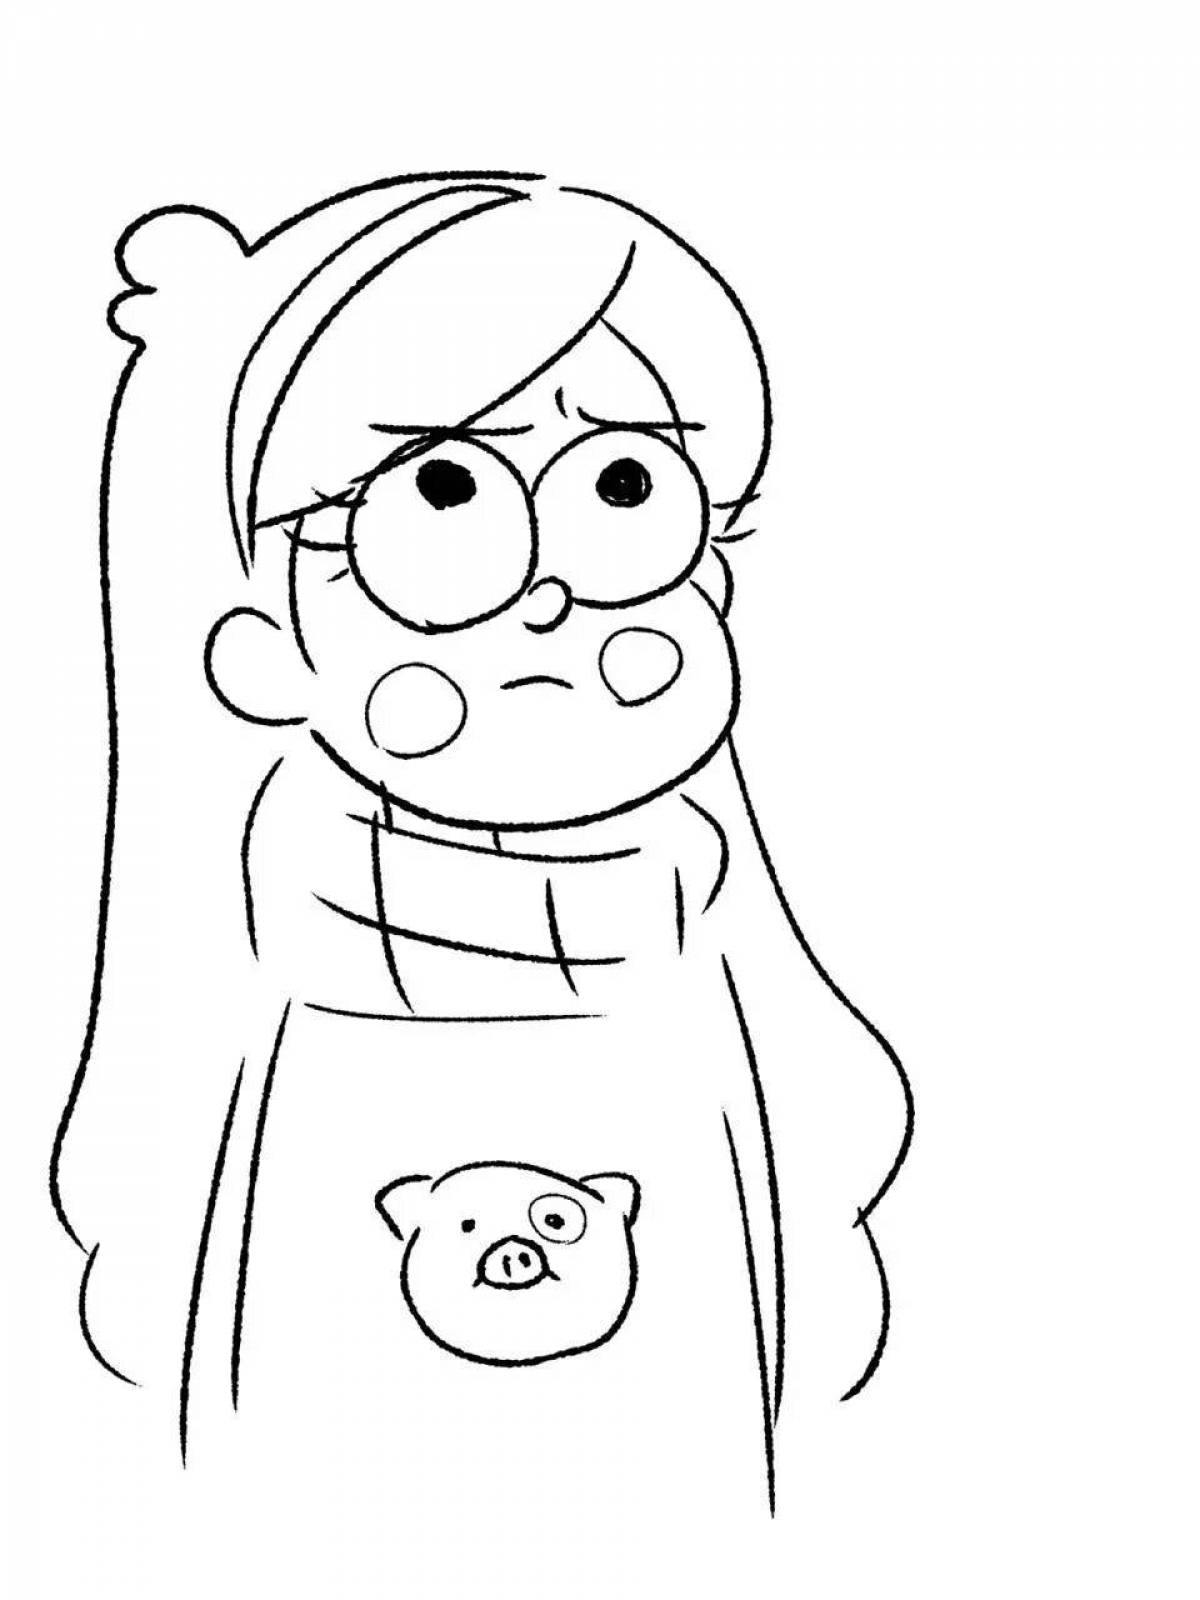 Mabel and chubby glitter coloring